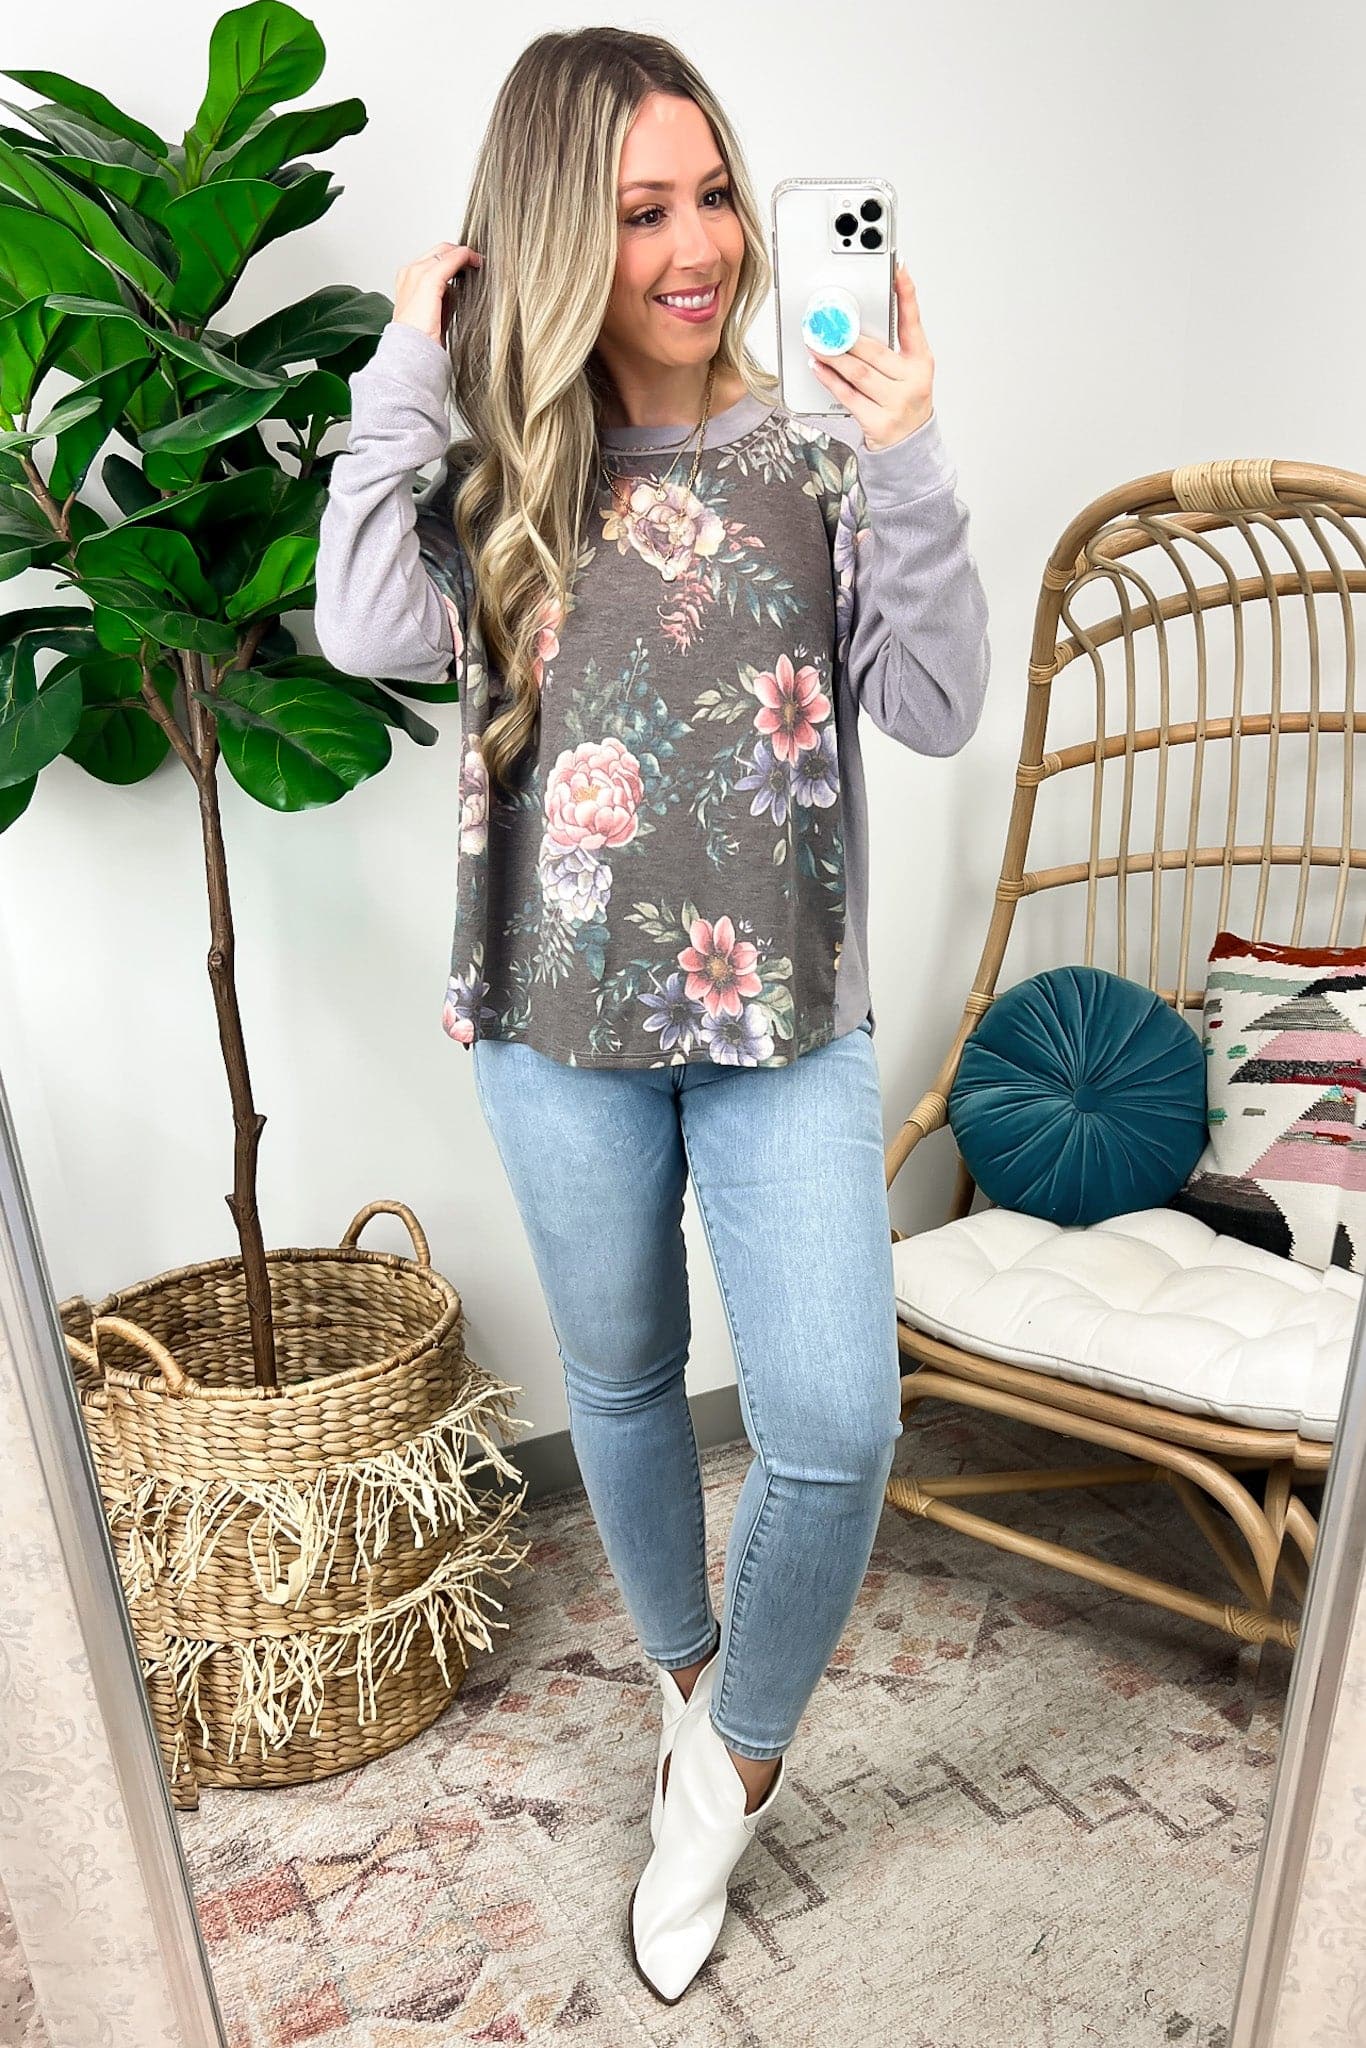  Anisah Color Block Floral Print Top - FINAL SALE - Madison and Mallory